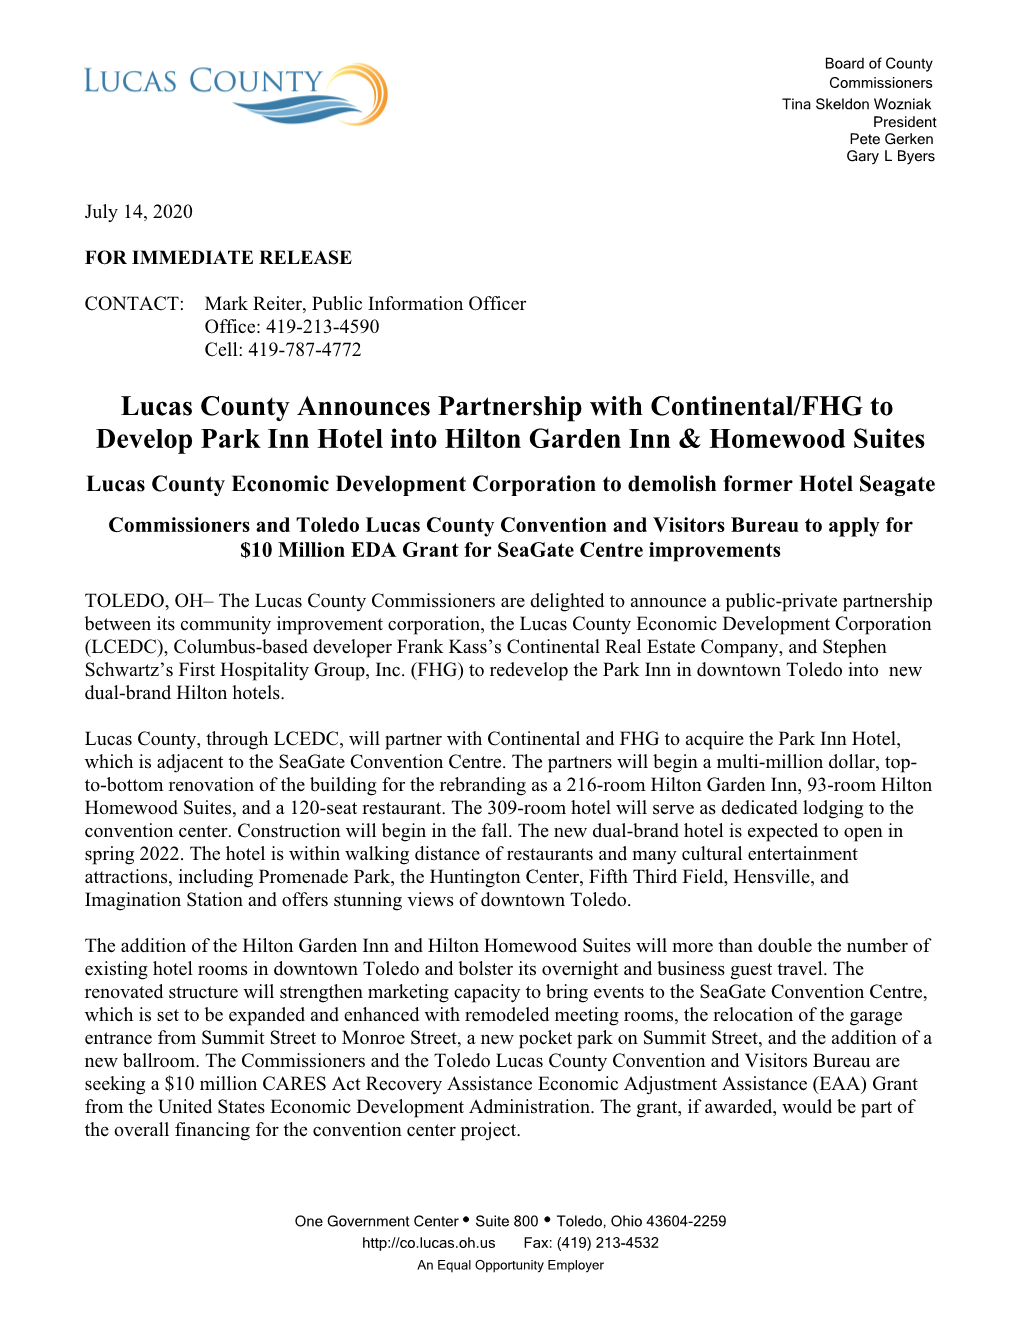 Lucas County Announces Partnership with Continental/FHG to Develop